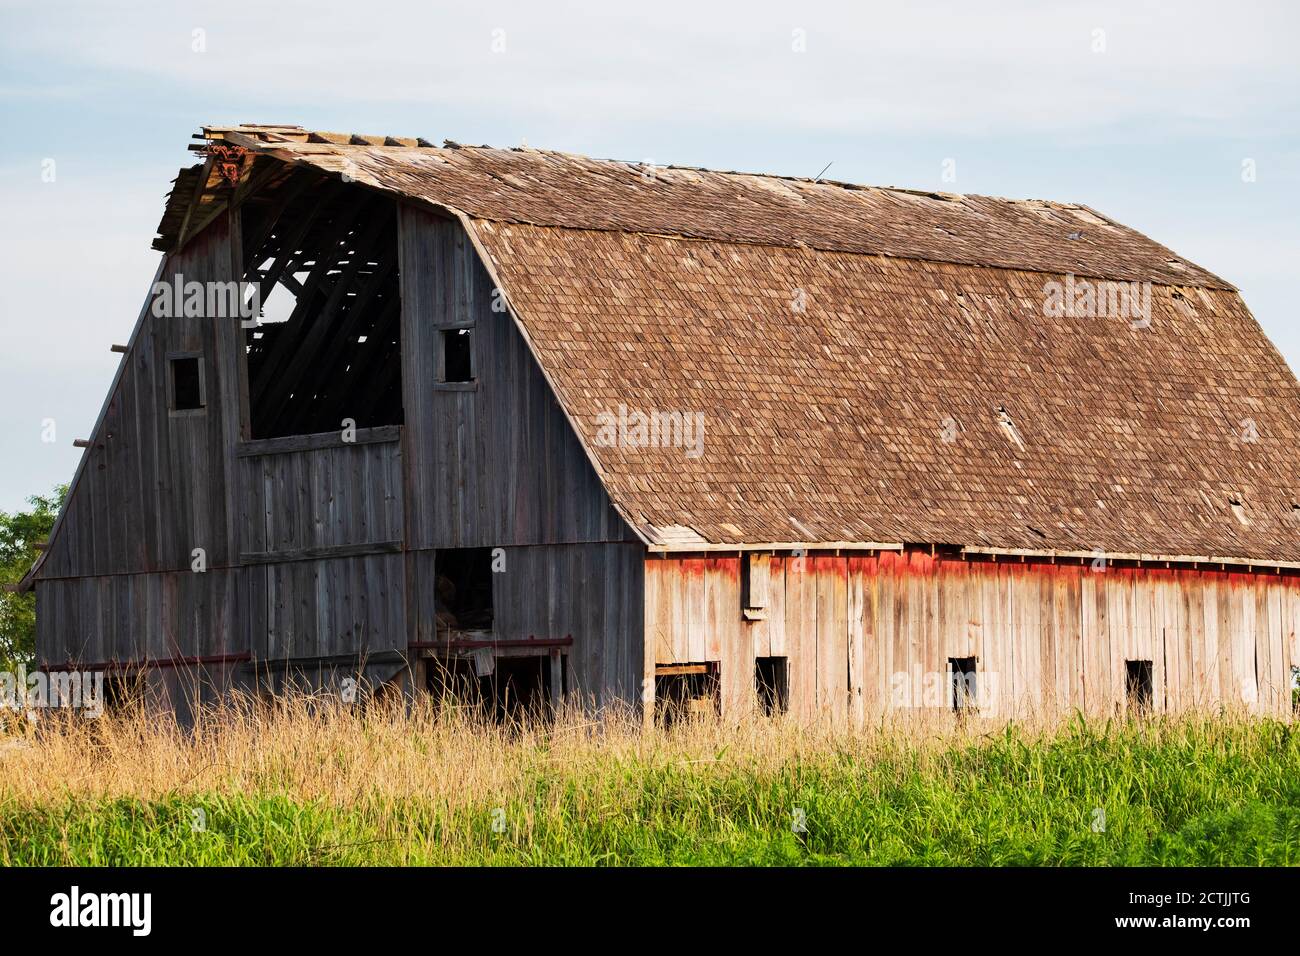 An old abandoned dilapidated wooden barn in the Oklahoma countryside in the late spring. USA. Stock Photo